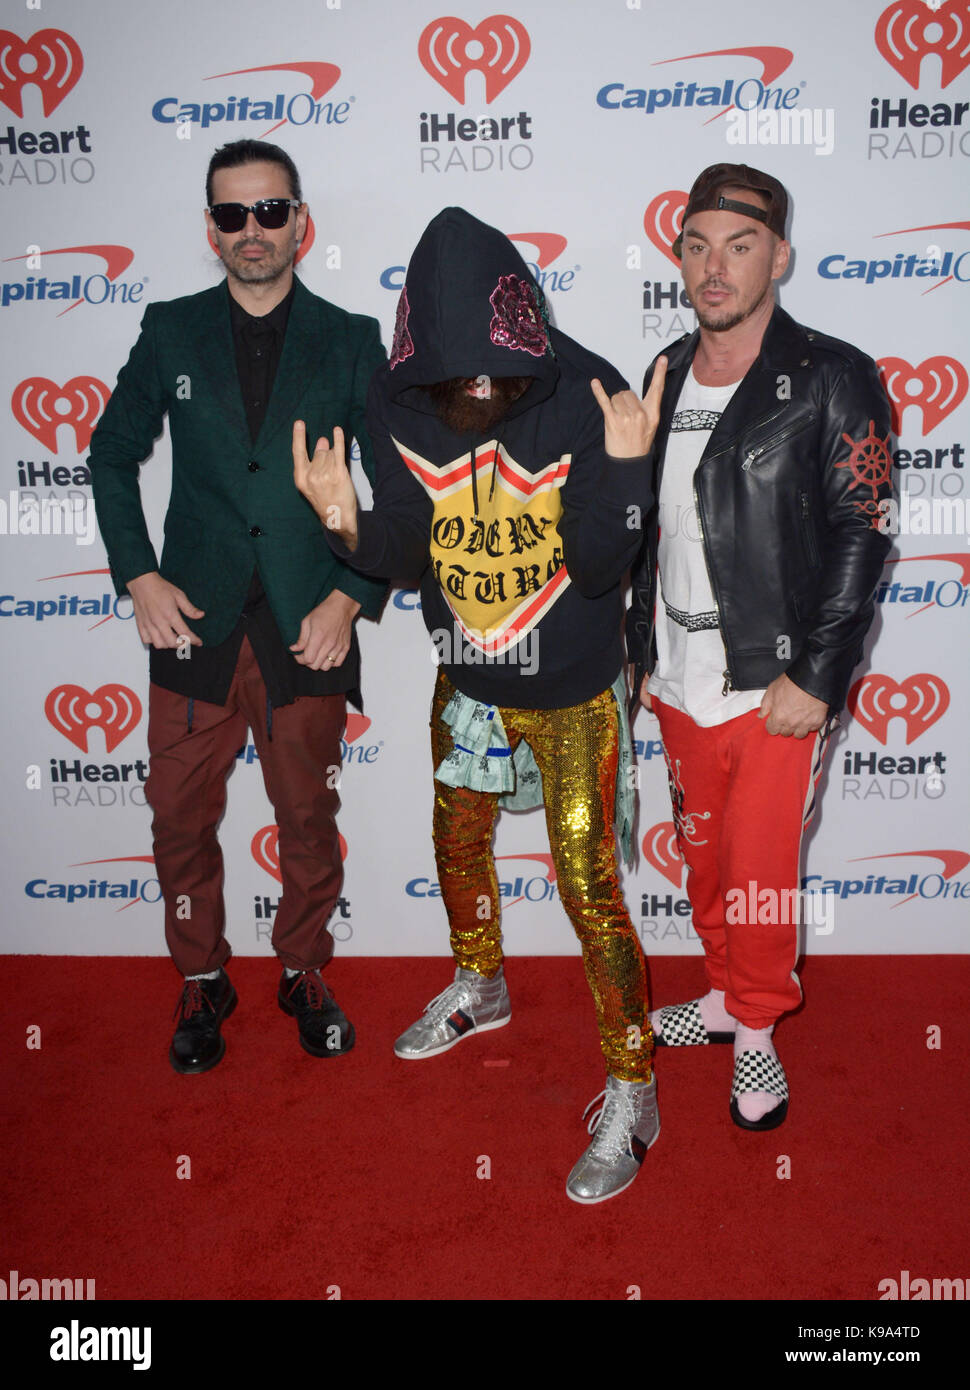 Las Vegas, Nevada, USA. 22nd Sep, 2017. Rock group 30 Seconds to Mars attend the 2017 iHeart Radio Music Festival Day 1 on September22, 2017 at the T-Mobile Arena in Las Vegas, Nevada Credit: Marcel Thomas/ZUMA Wire/Alamy Live News Stock Photo